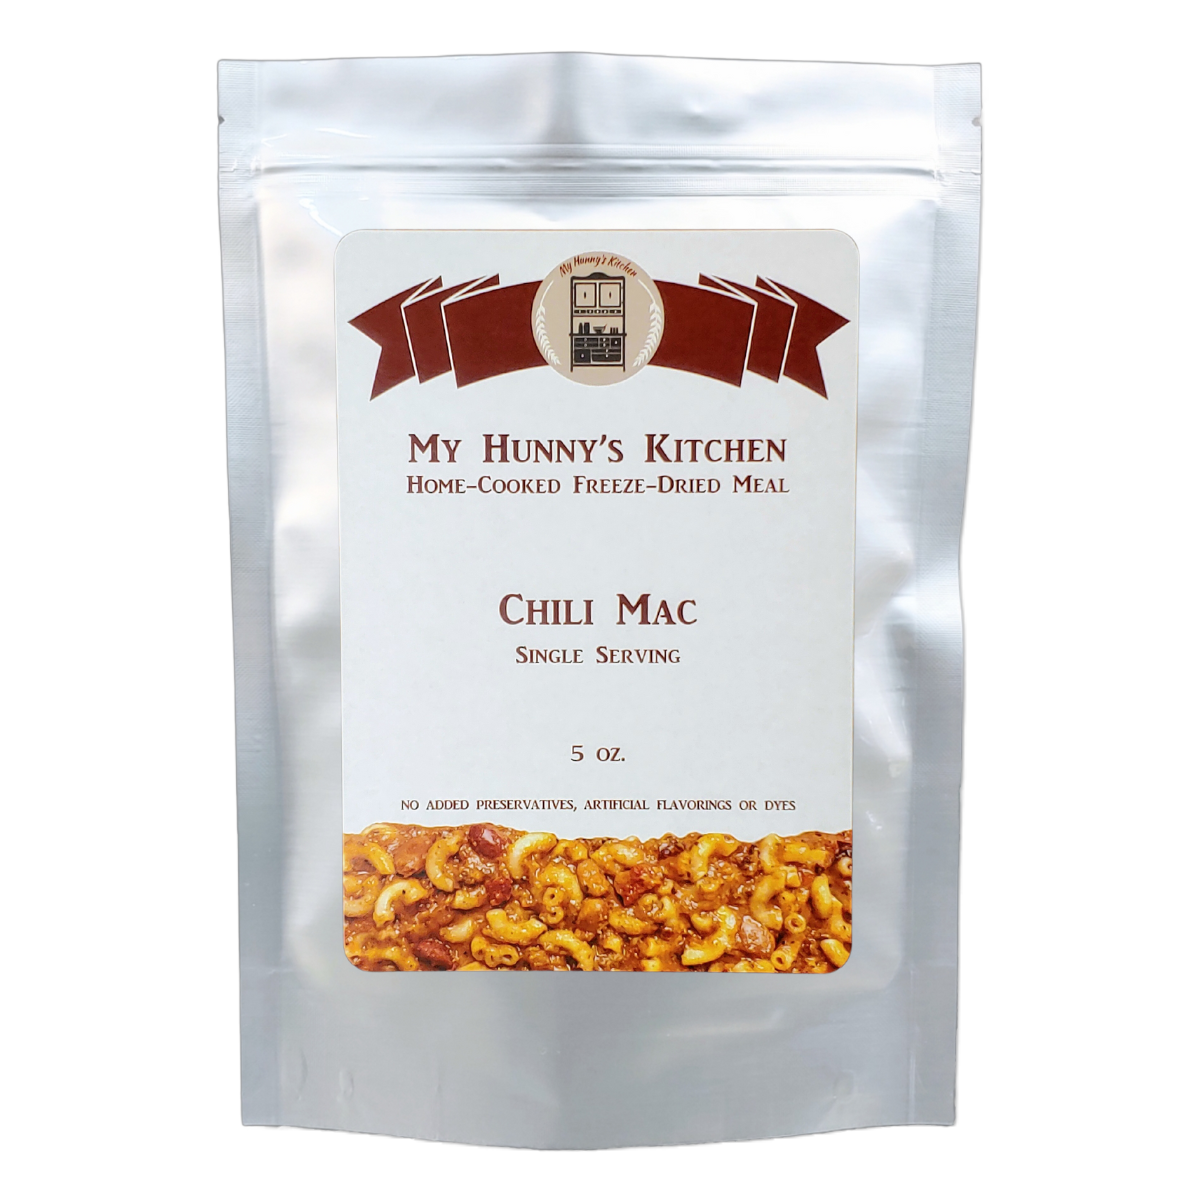 Chili Mac Freeze Dried Meal packaging front view